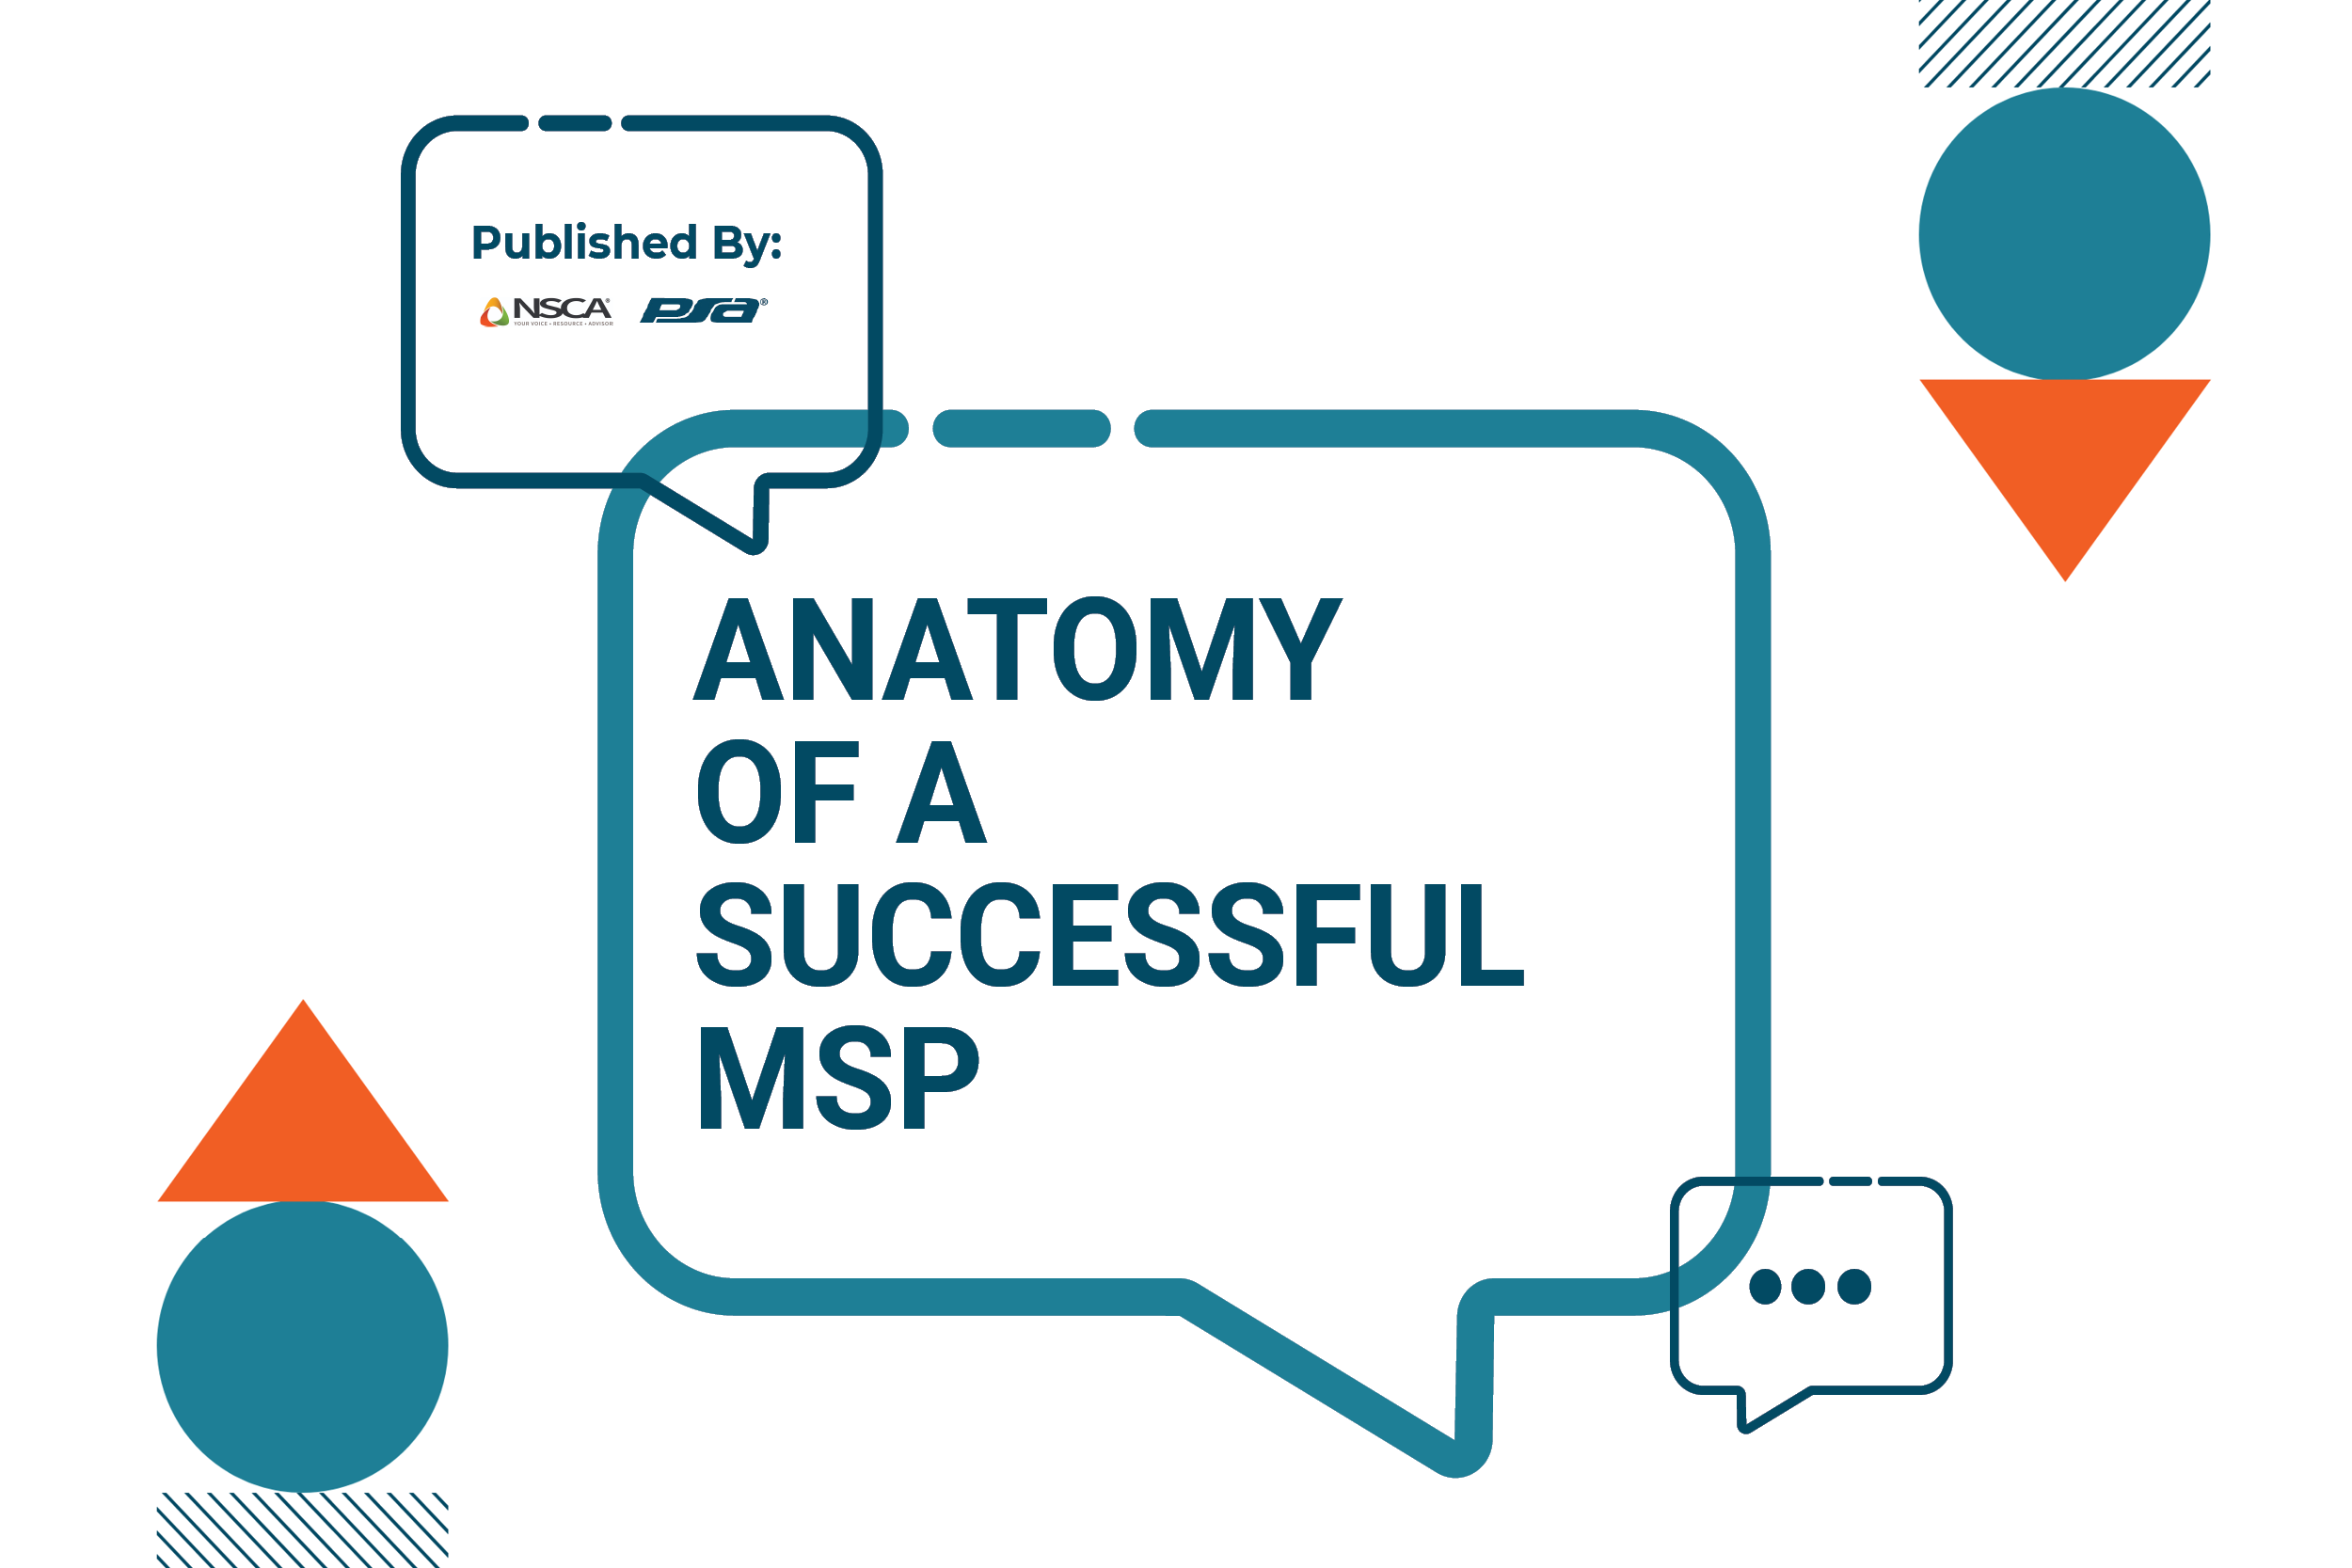 Anatomy of a Successful MSP: Report Cover